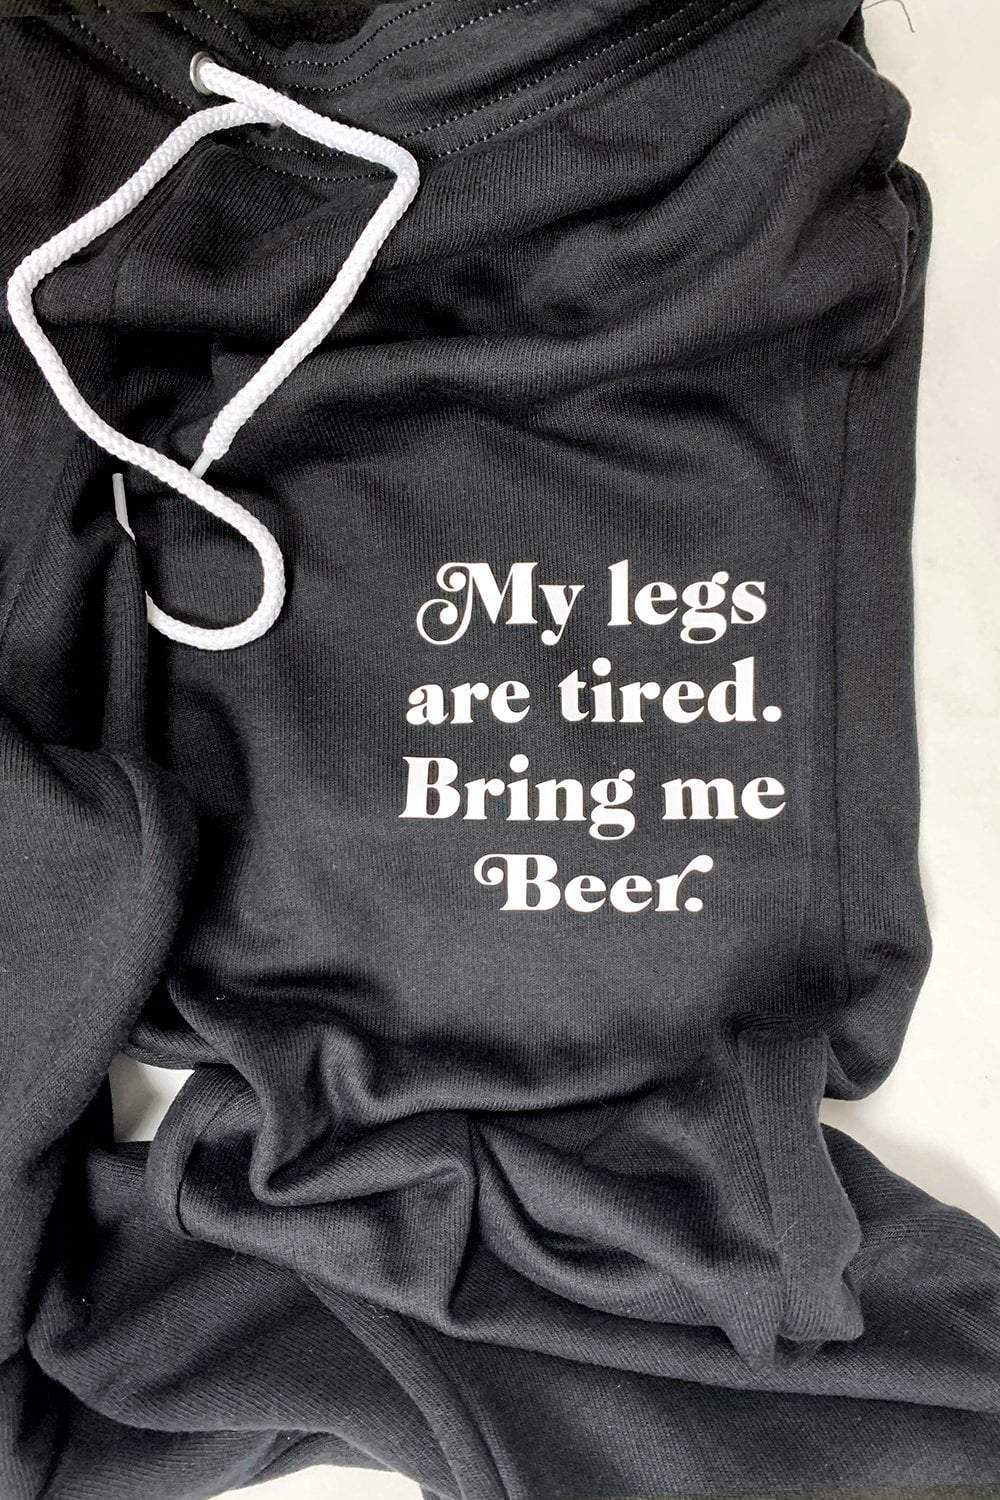 Sarah Marie Design Studio Pants XSmall / Beer My legs are tired Joggers